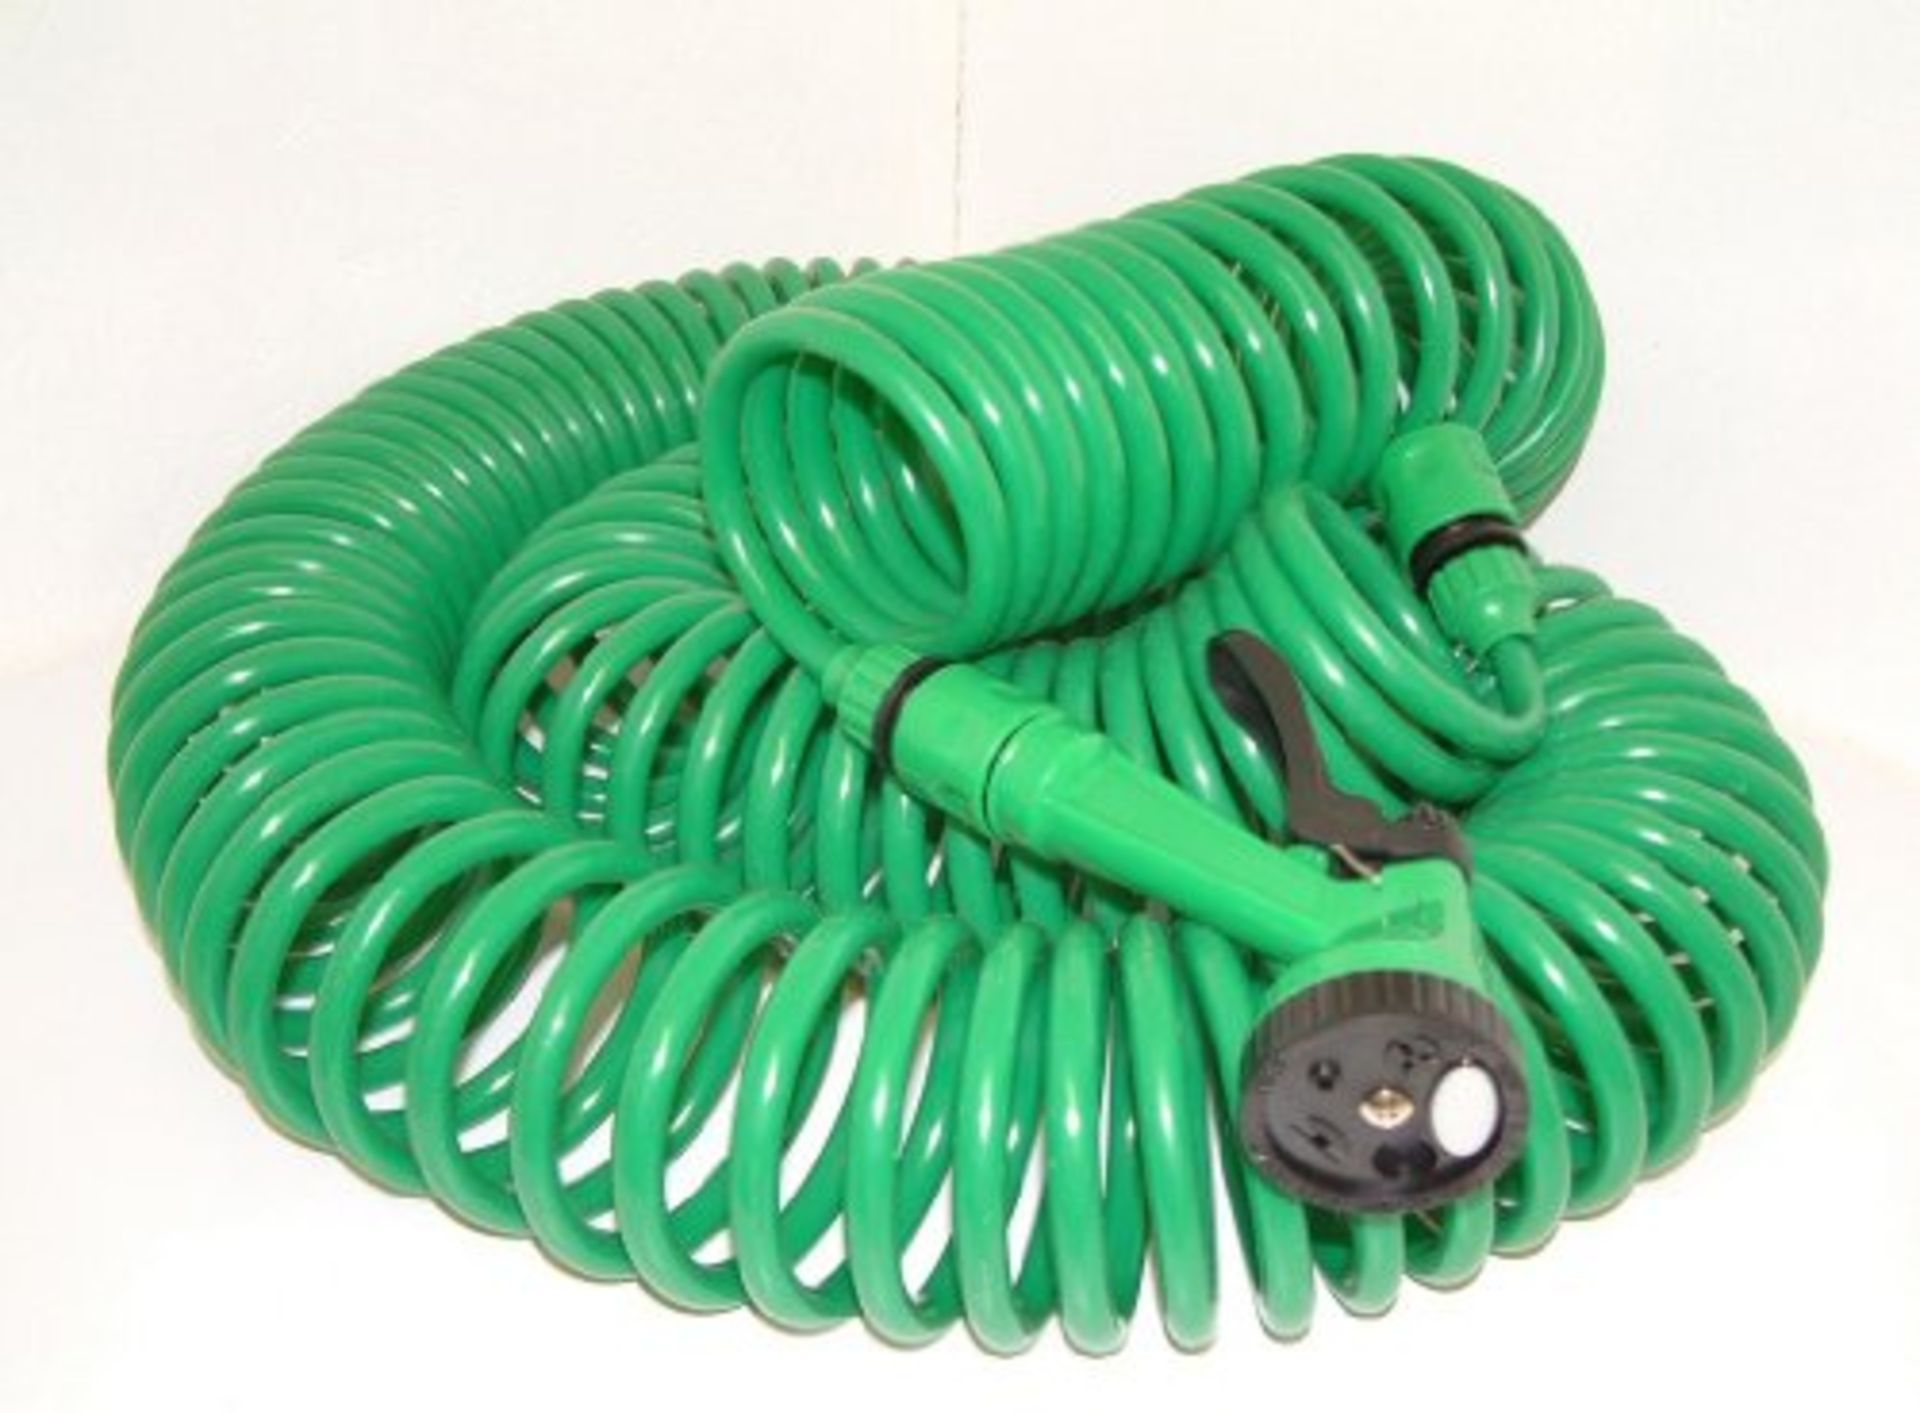 30 Metre Coil Hose With Nozzle And Tap Connectors Etc - Image 3 of 4